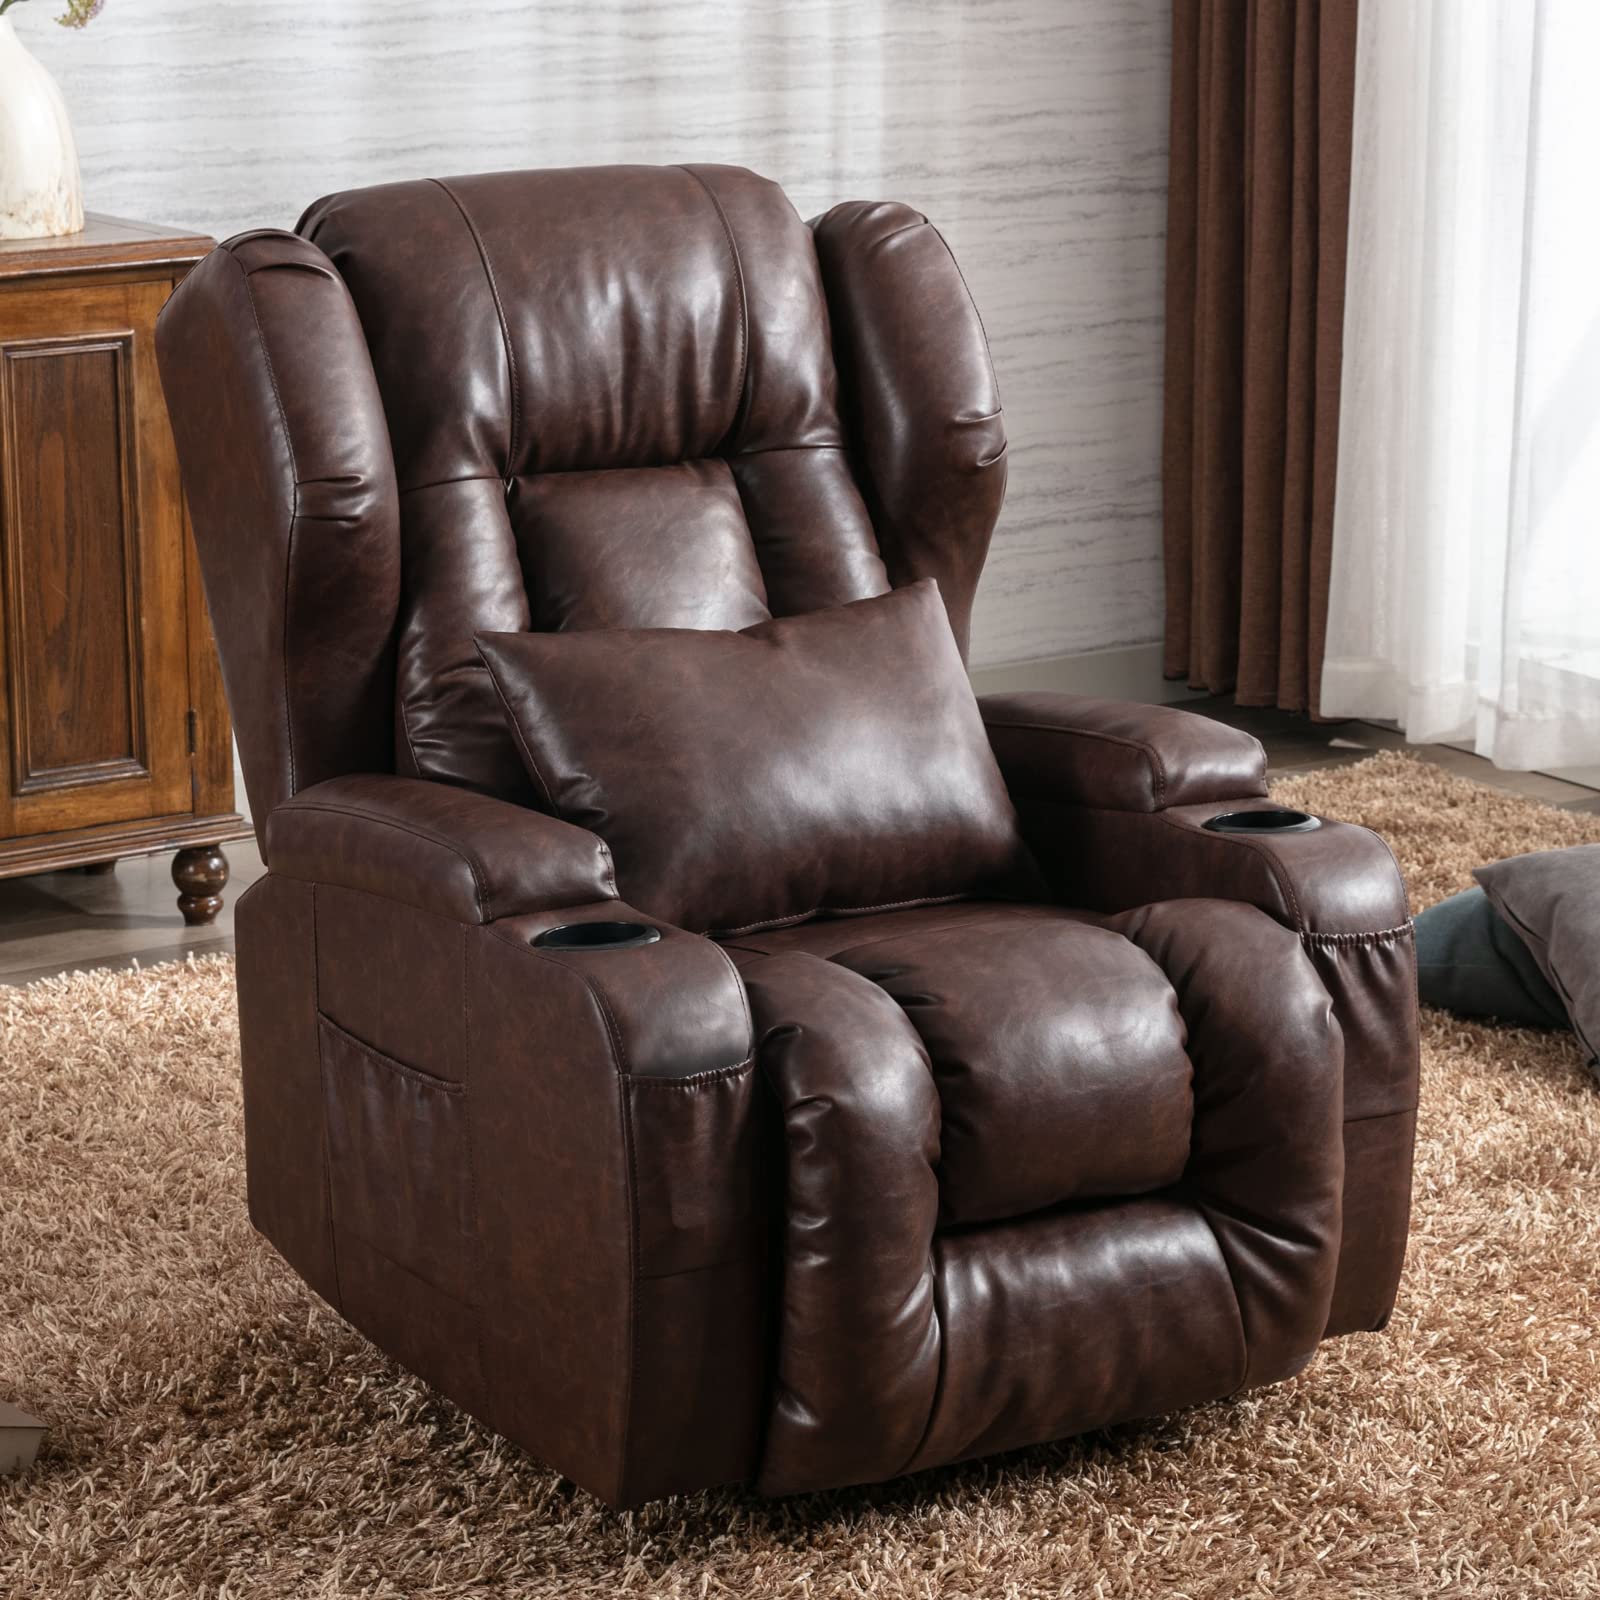 ETAgERIA Rocker Recliner chairs 360A Swivel glider Recliner Ergonomic Leather Lounge Rocking chairs for Nursery with cup Holders